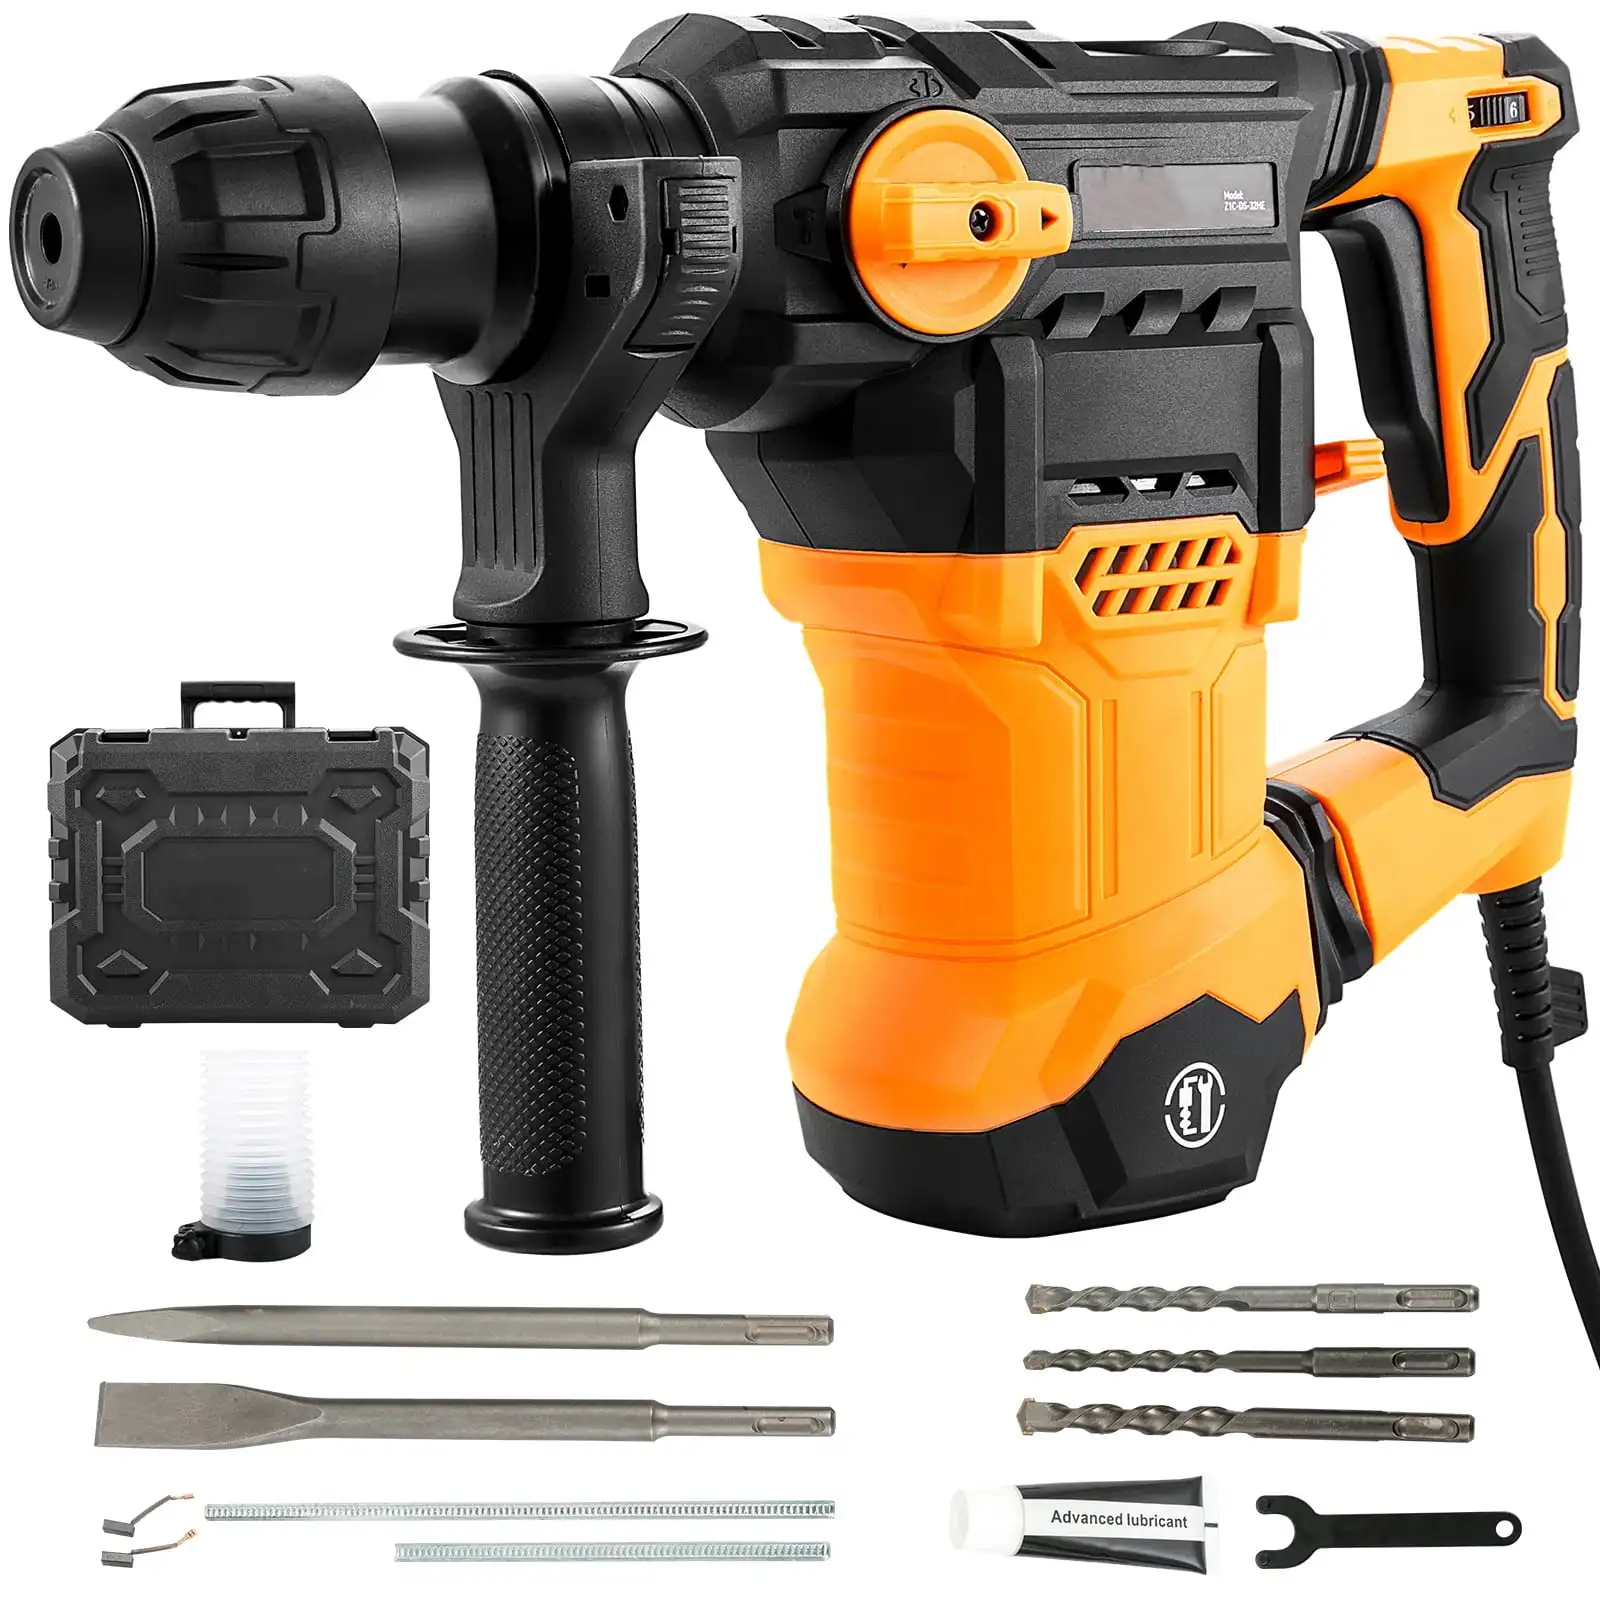 

BENTISM 1-1/4" SDS-Plus Rotary Hammer Drill 13 Amp Corded Drills Heavy Duty Chipping Hammers w/Vibration Control & Safety Clutch